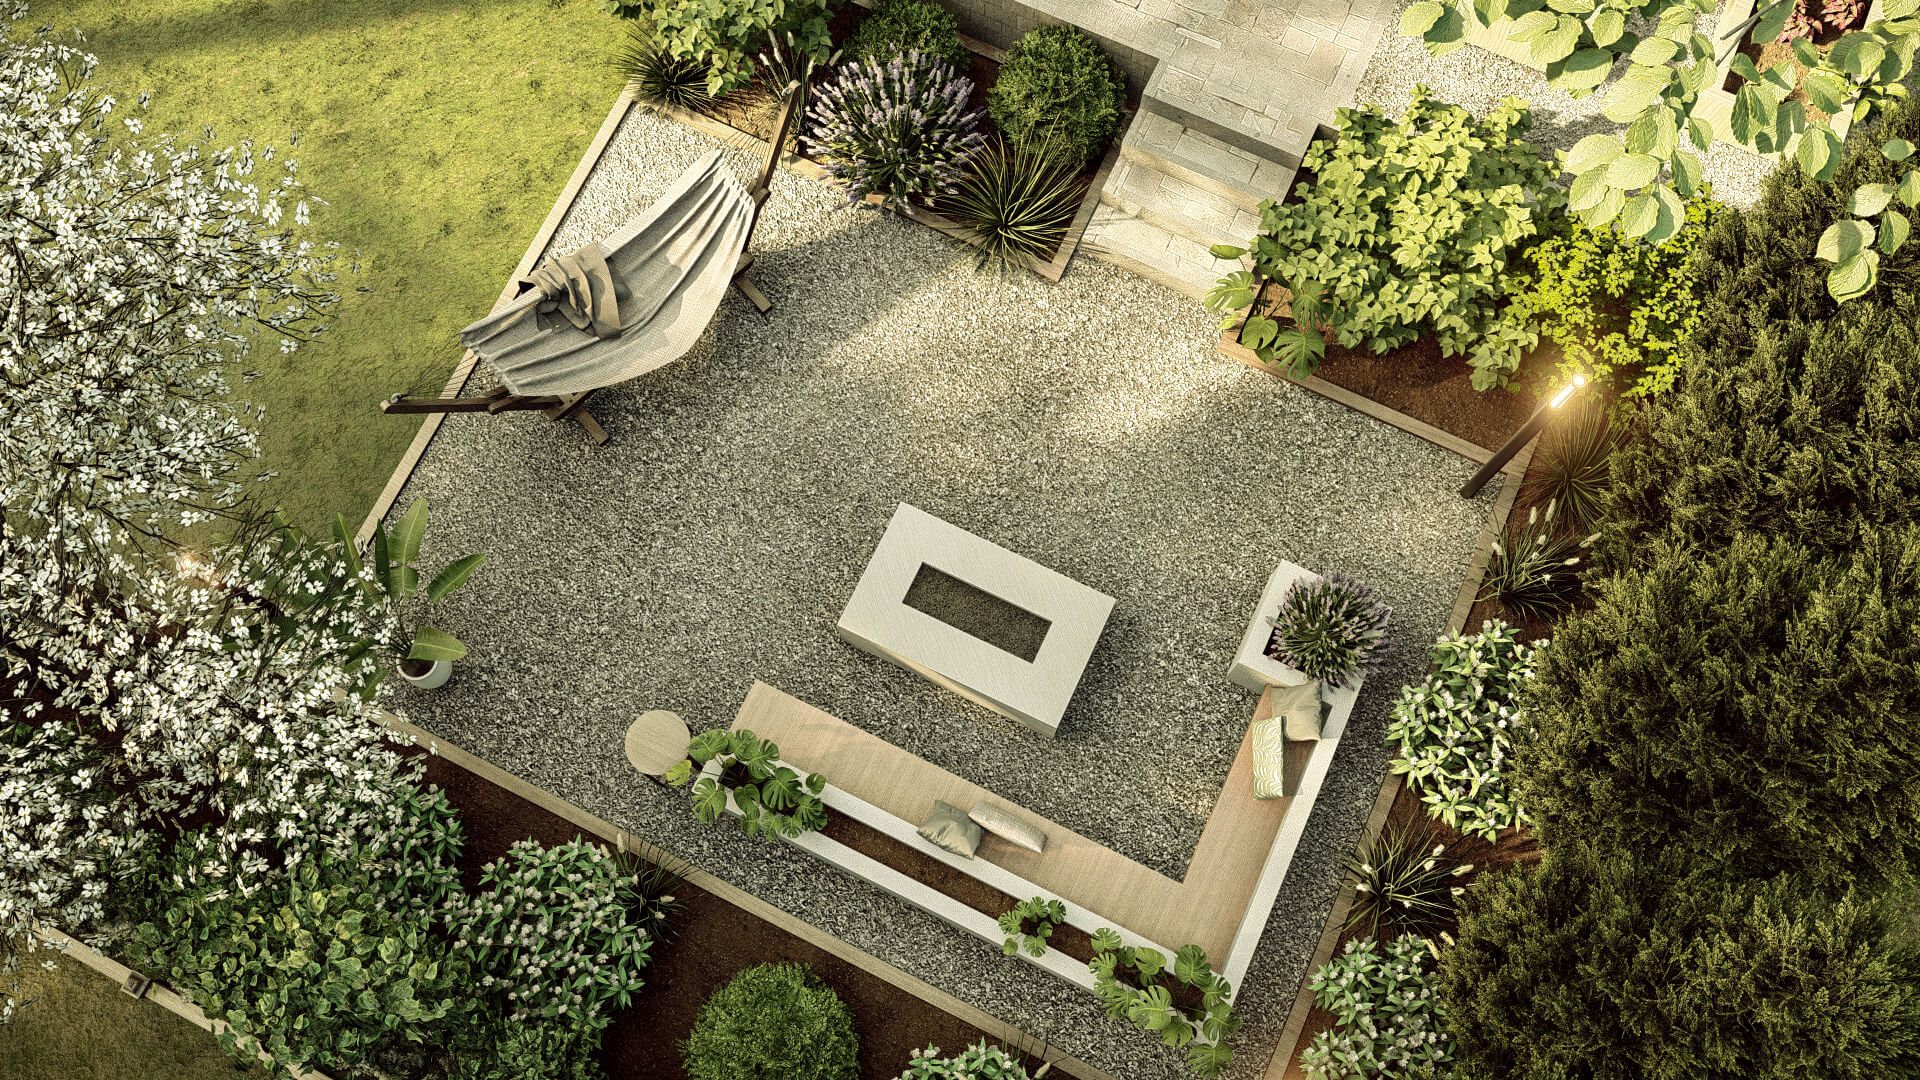 Overhead view of a tranquil garden retreat with gravel ground, modern fire pit, outdoor seating, and surrounded by lush greenery and flowering plants.